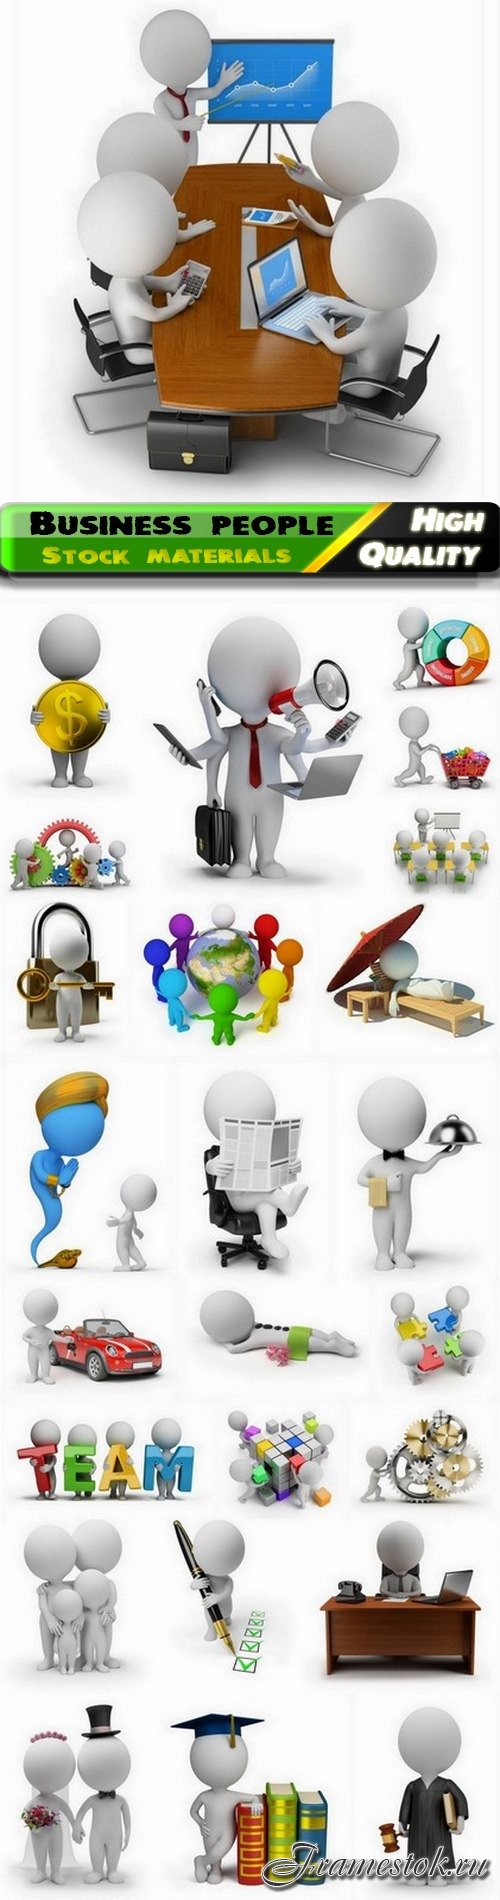 Business people creative 3D render funny white human - 25 HQ Jpg